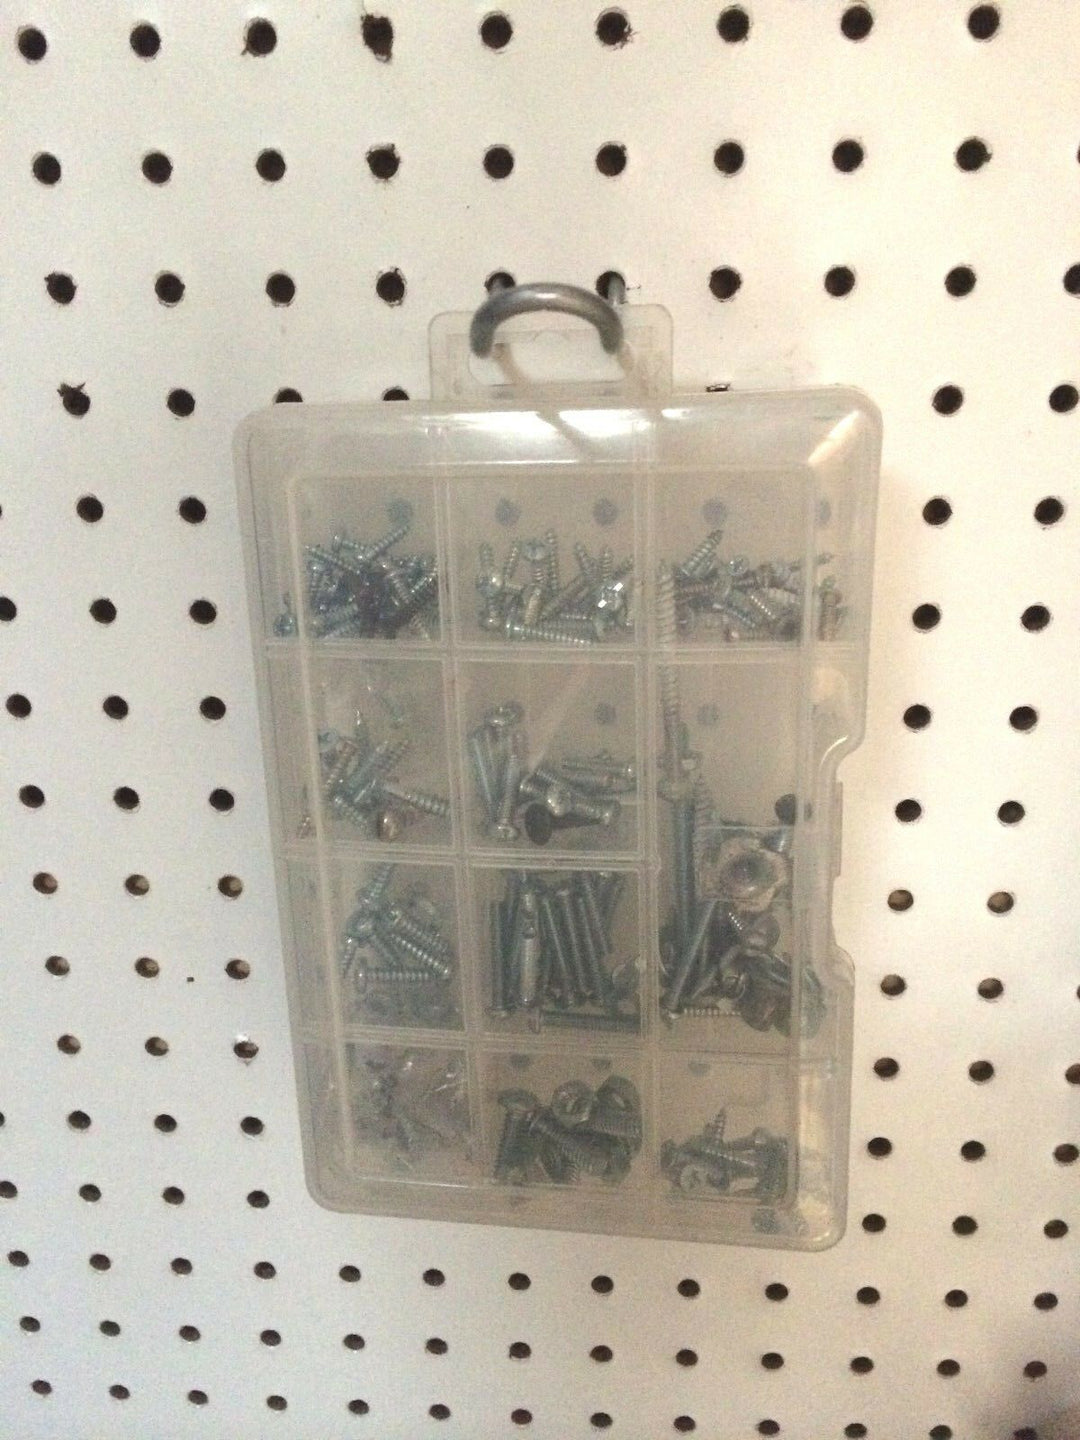 (10 PACK) 6" Looped Metal Peg Hooks w/Elevated Tip. Fits 1/8 to 1/4 Pegboard